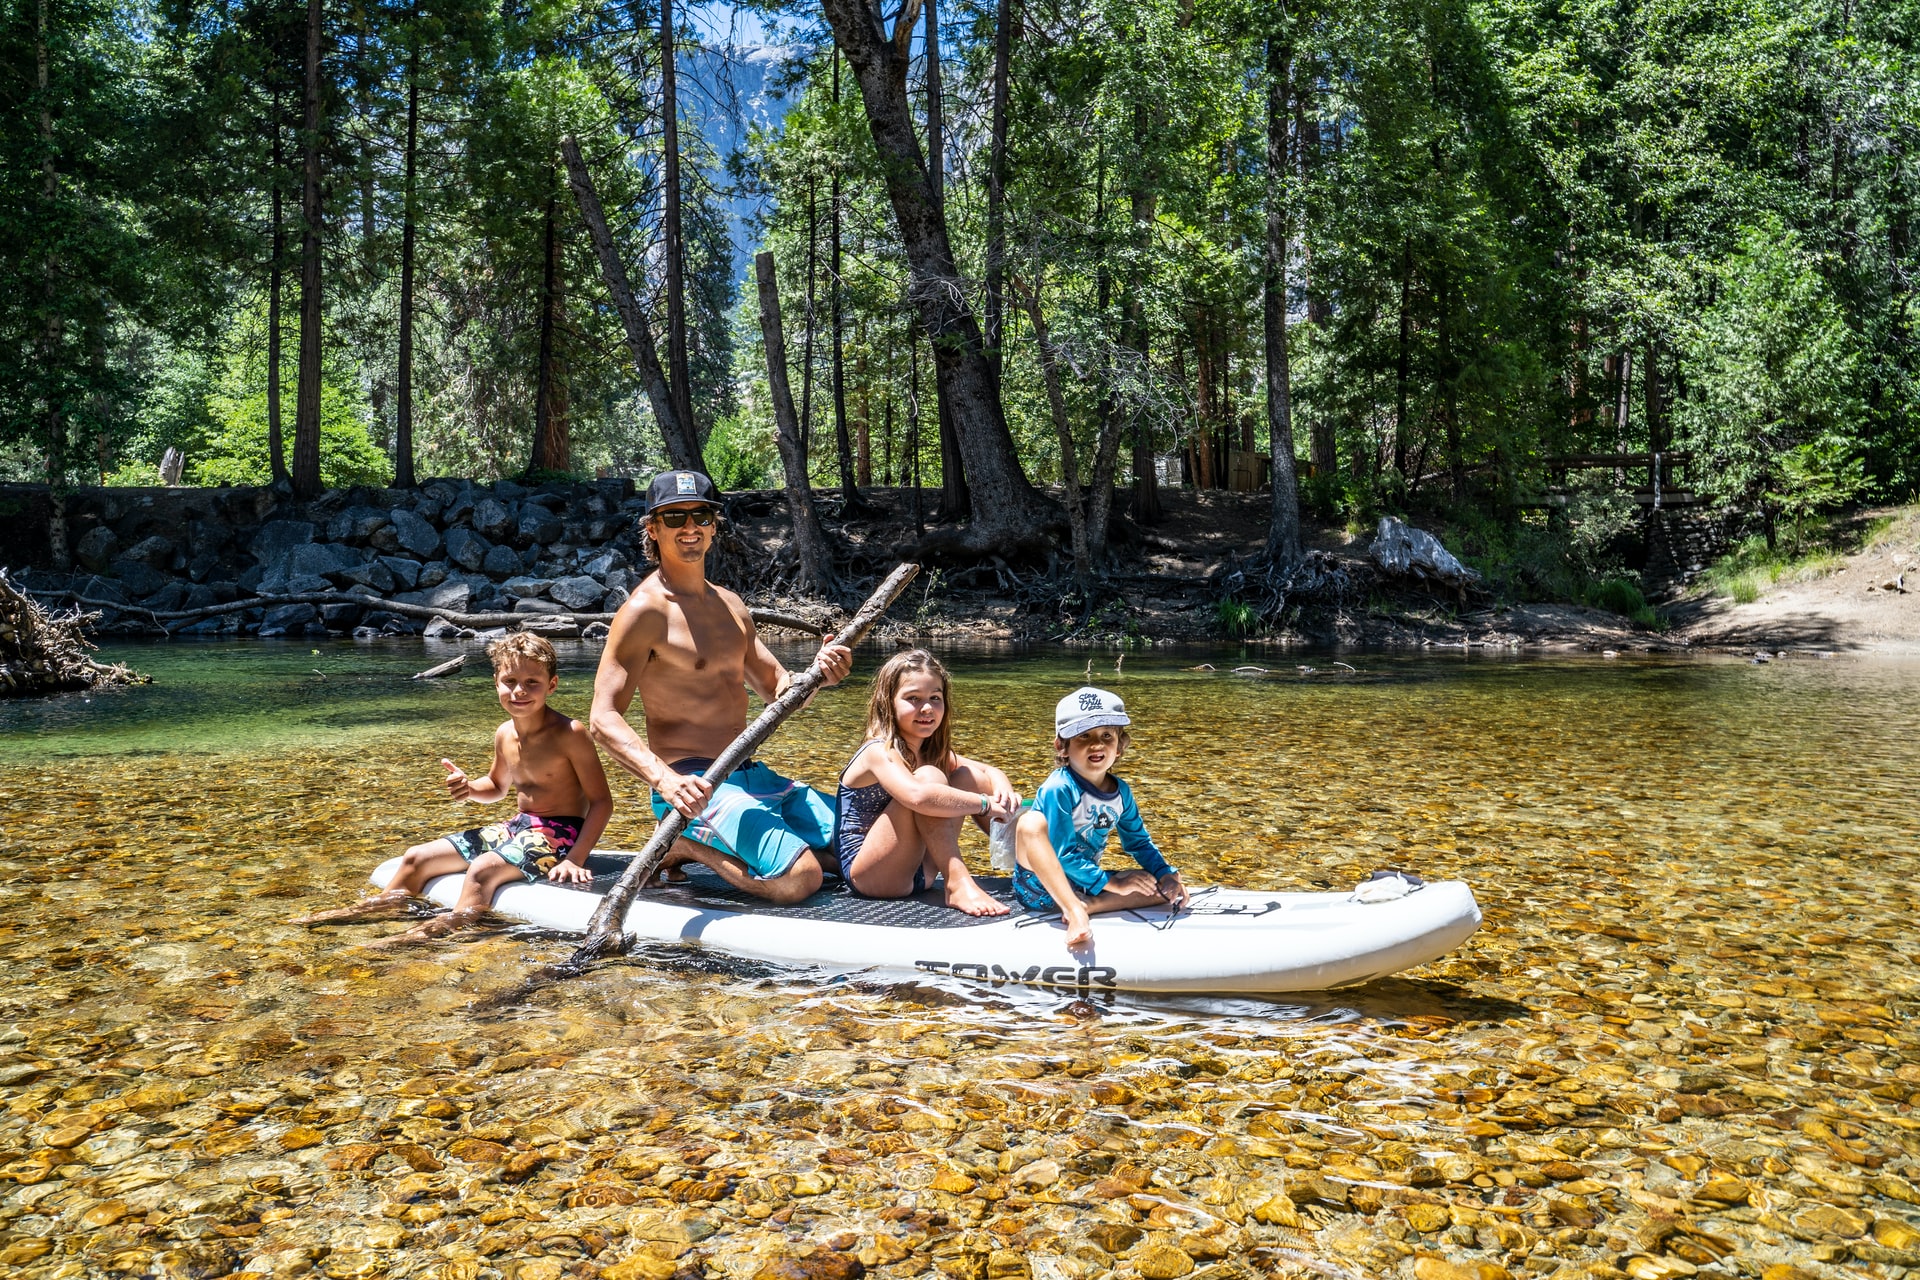 Outdoor family paddling. Source: @Tower Paddle Boards on Unsplash